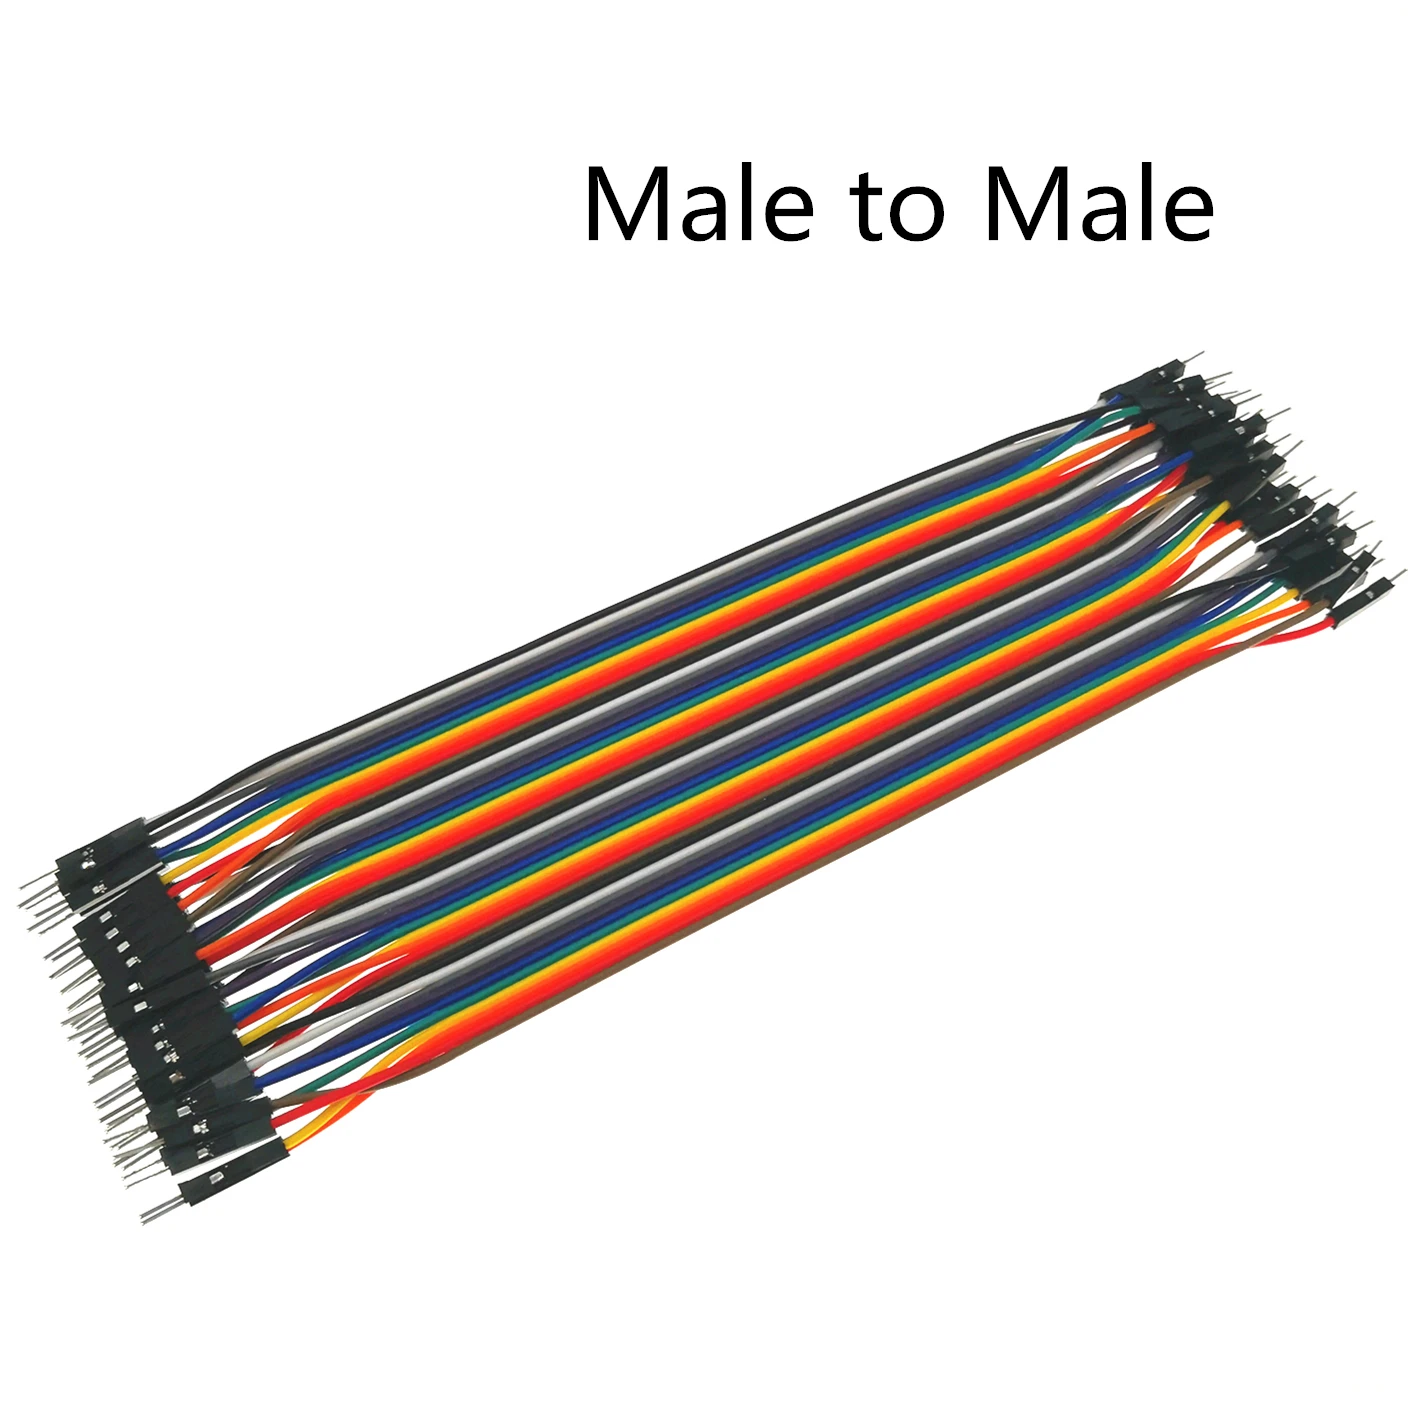 Dupont Jumper wire Kits 20CM 30CM Male to Male+ Female to Male+ Female to Female Jumper Wire Dupont Cable for arduino DIY KIT